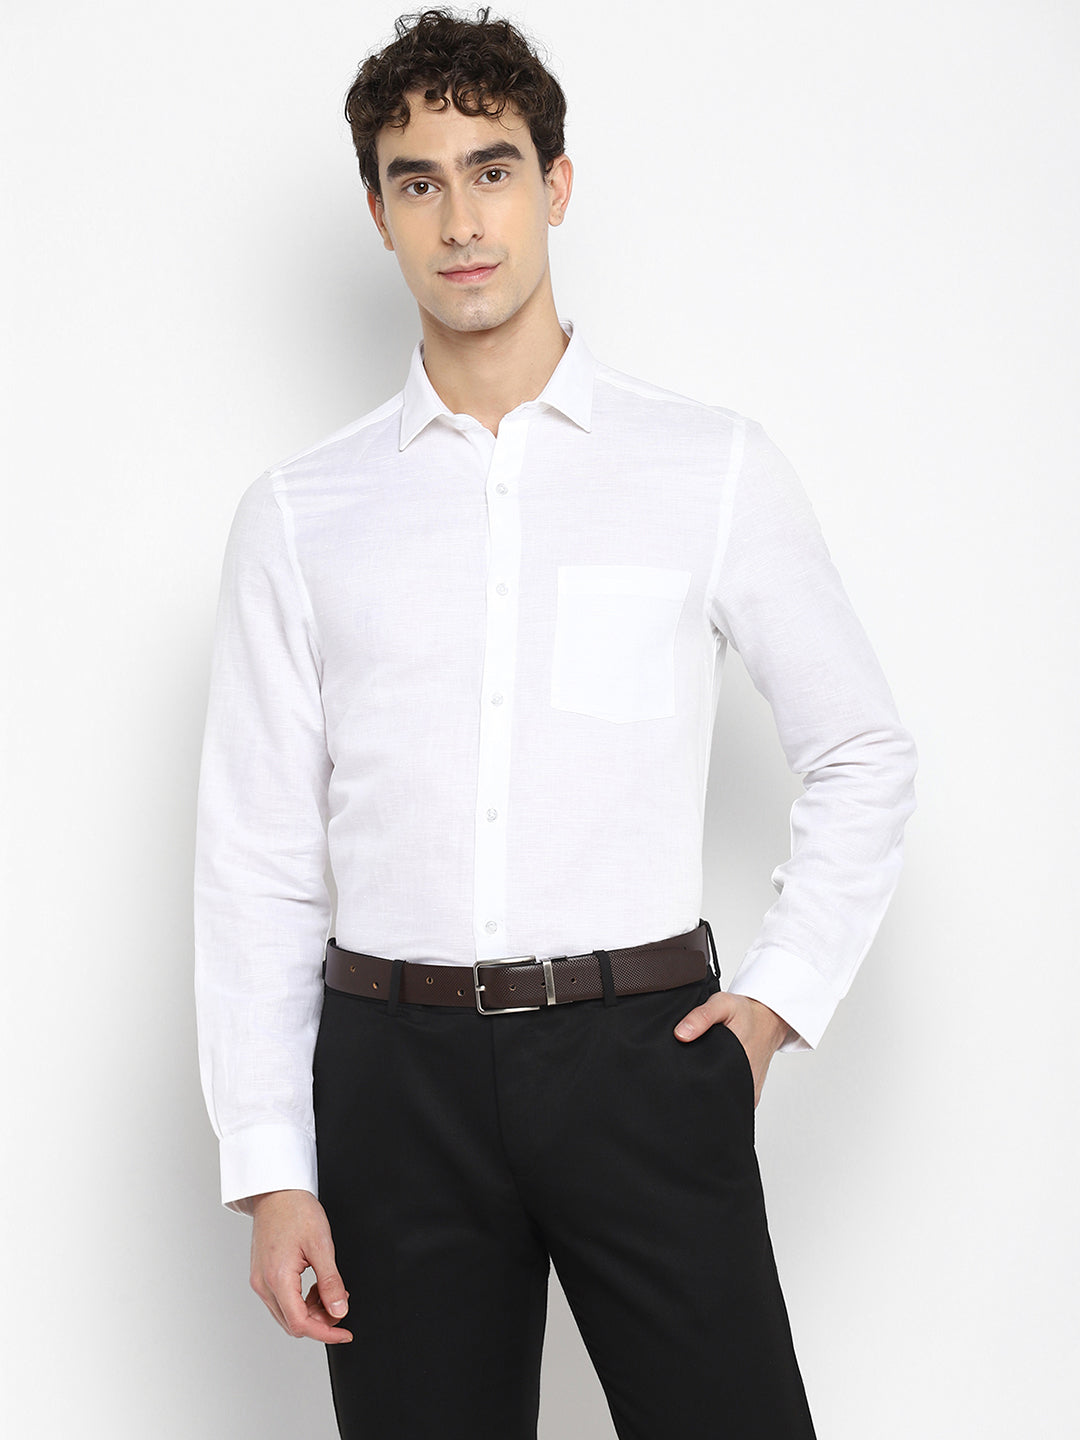 Navy Blue Cotton Solid Regular Fit Shirts